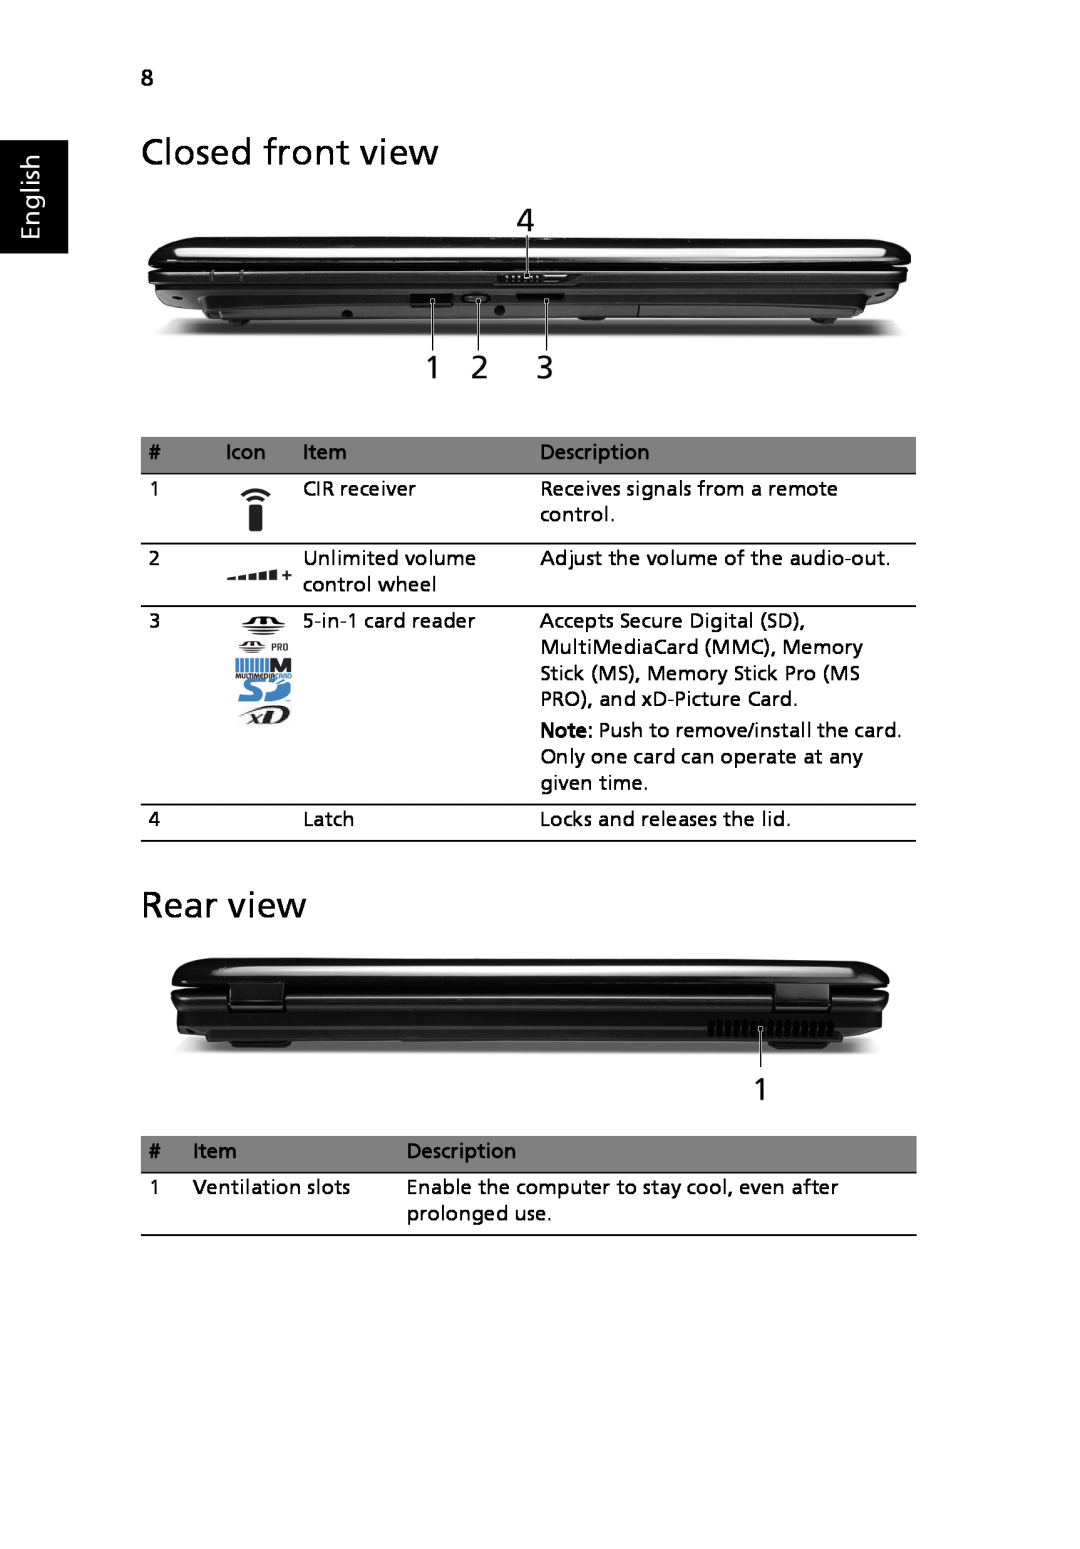 Acer 7730 Series manual Closed front view, Rear view, Icon, English, Description 